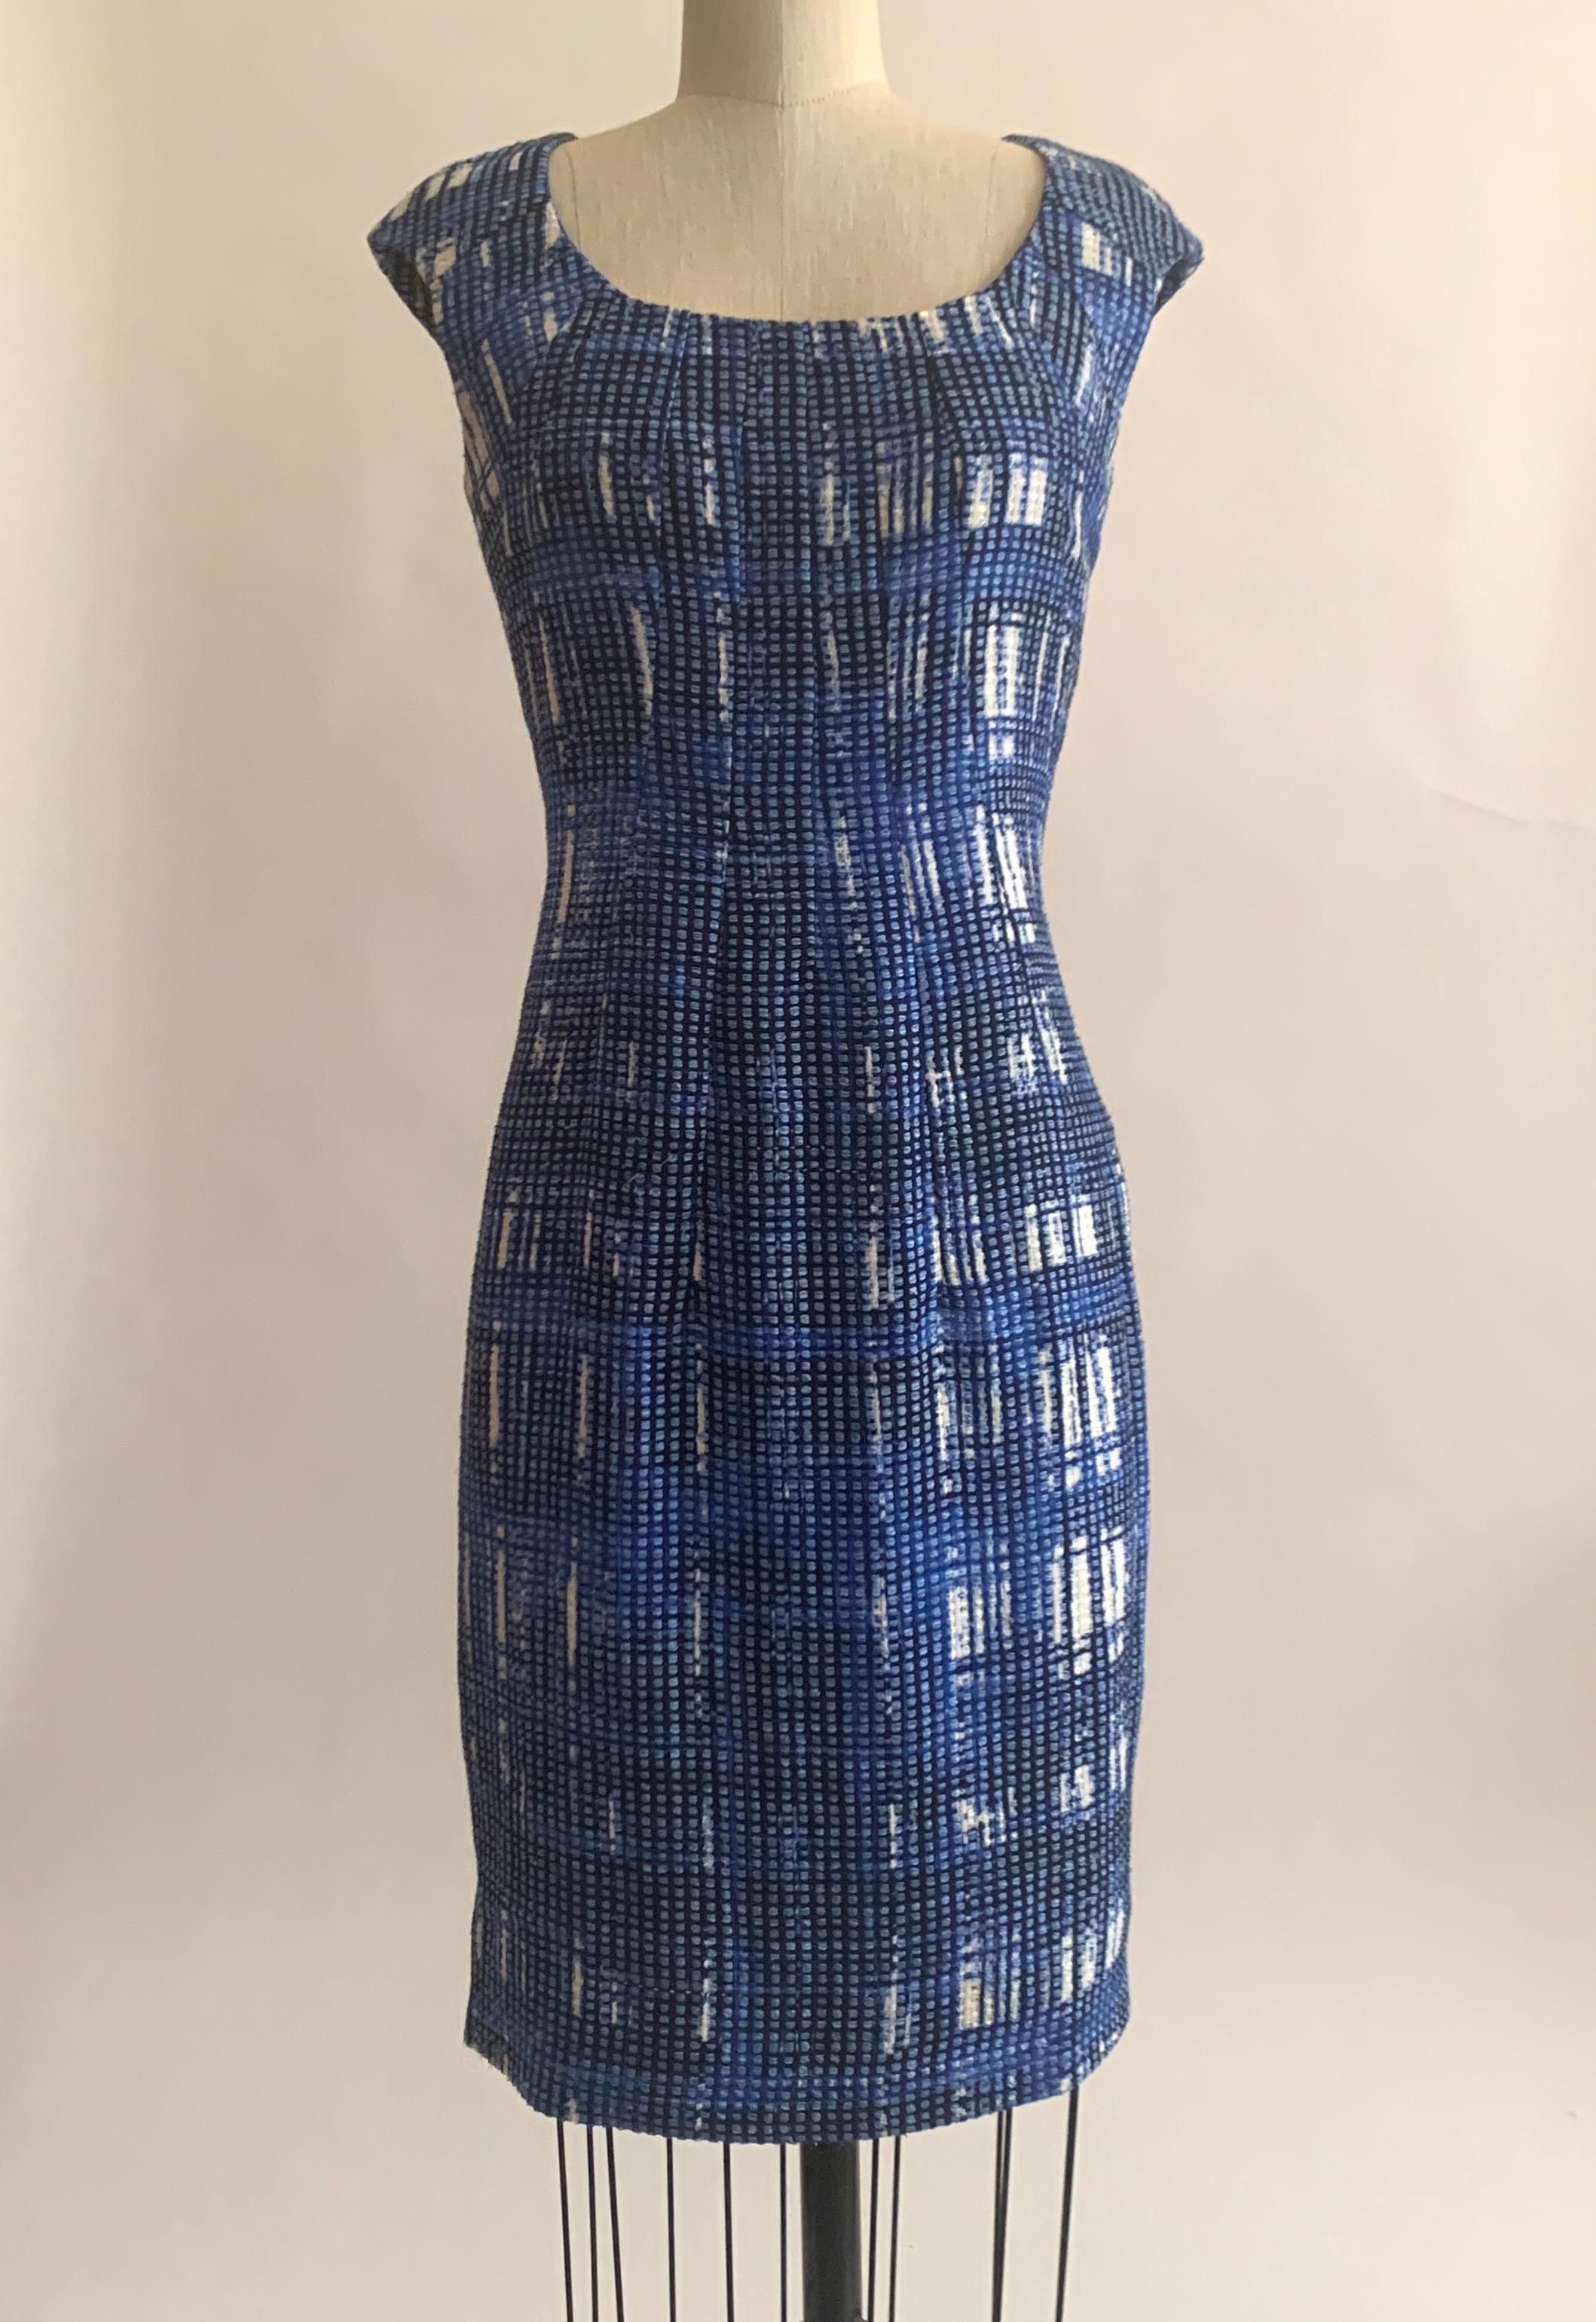 Oscar de la Renta silk pencil cut dress in an amazing blue and white abstract check ribbon weave. Back zip and hook and eye. Oscar de la Renta signature print lining.

57% cotton, 43% polyamide.
Fully lined in 100% silk.

Made in Italy.

Size 6. may